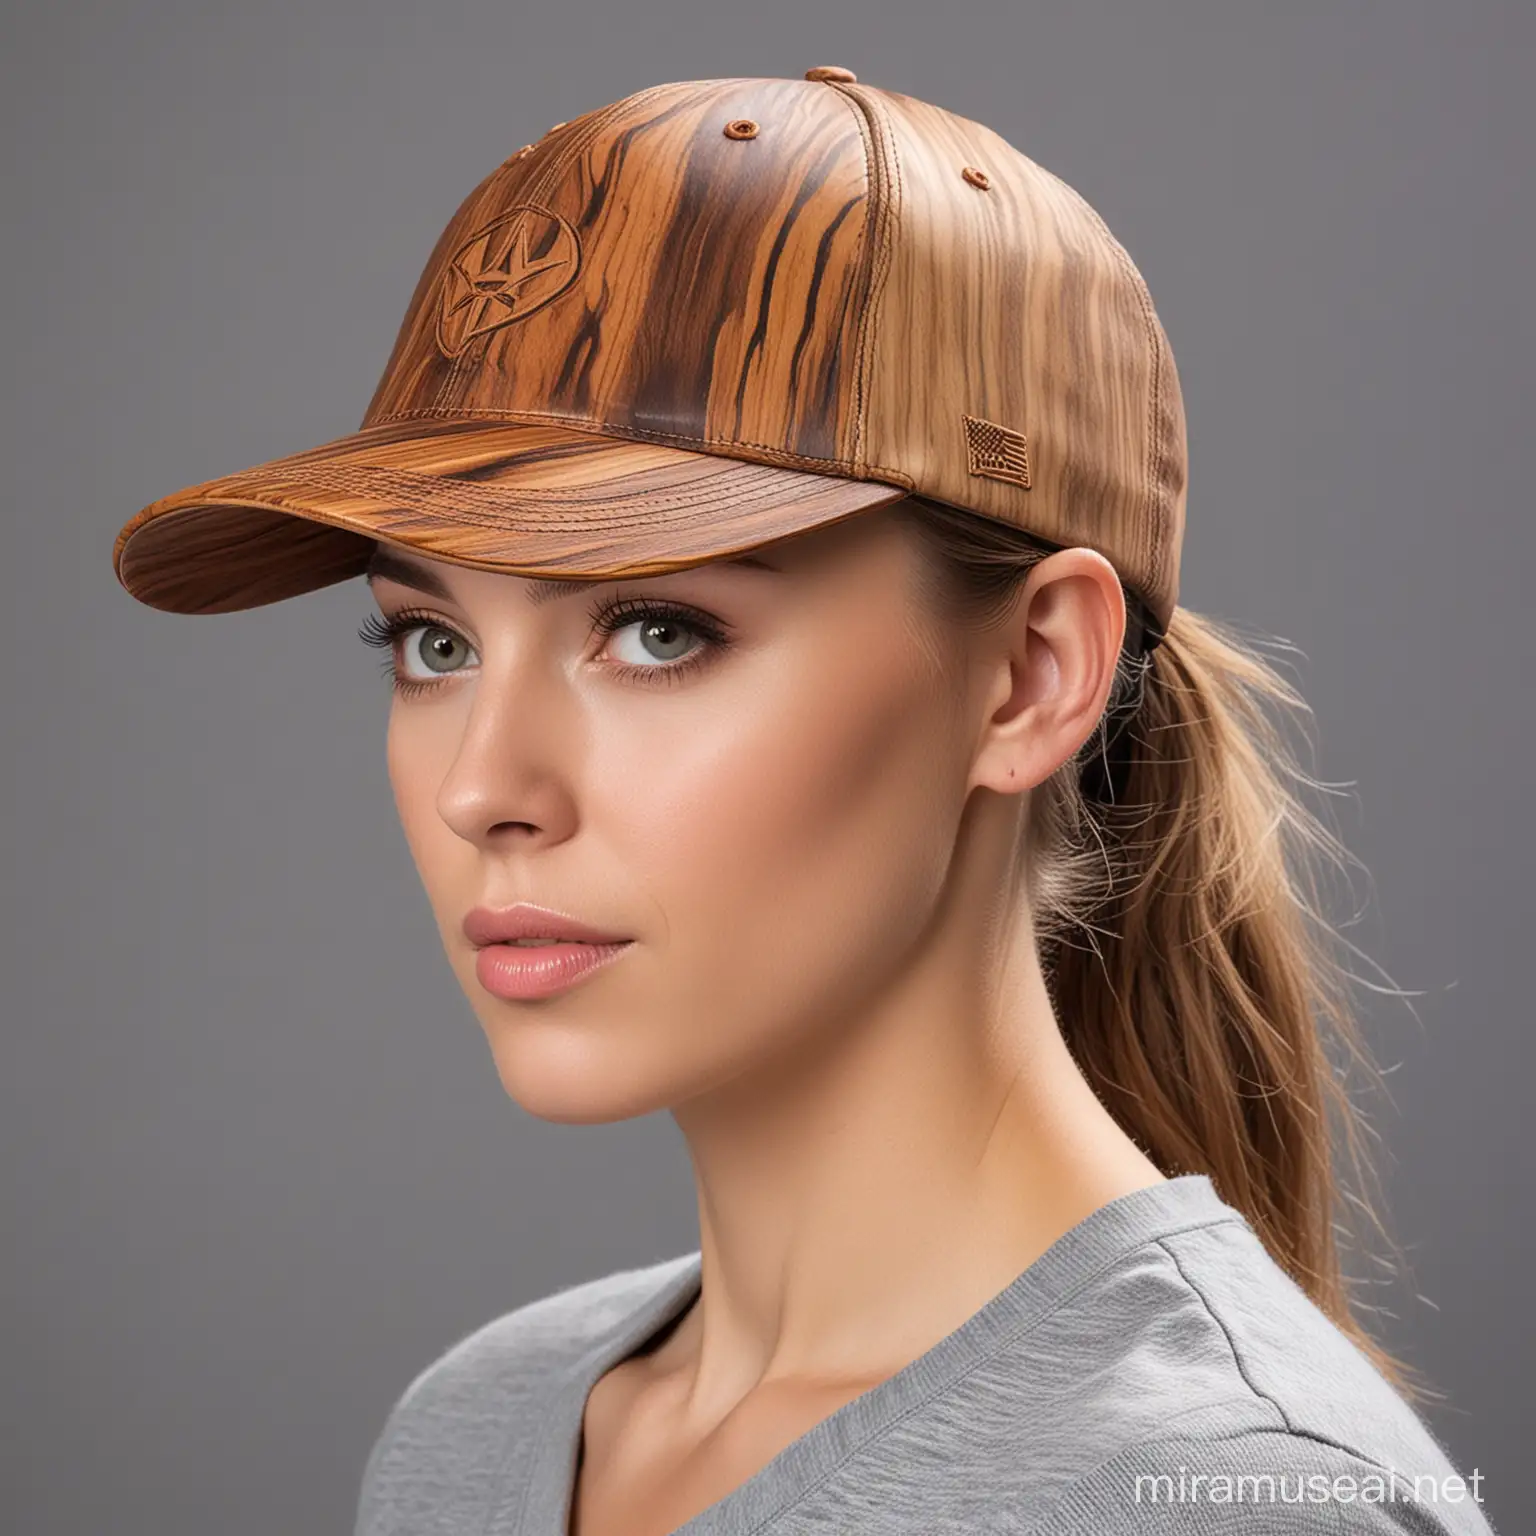 generate cap world most unique and fashionable cap it like wood